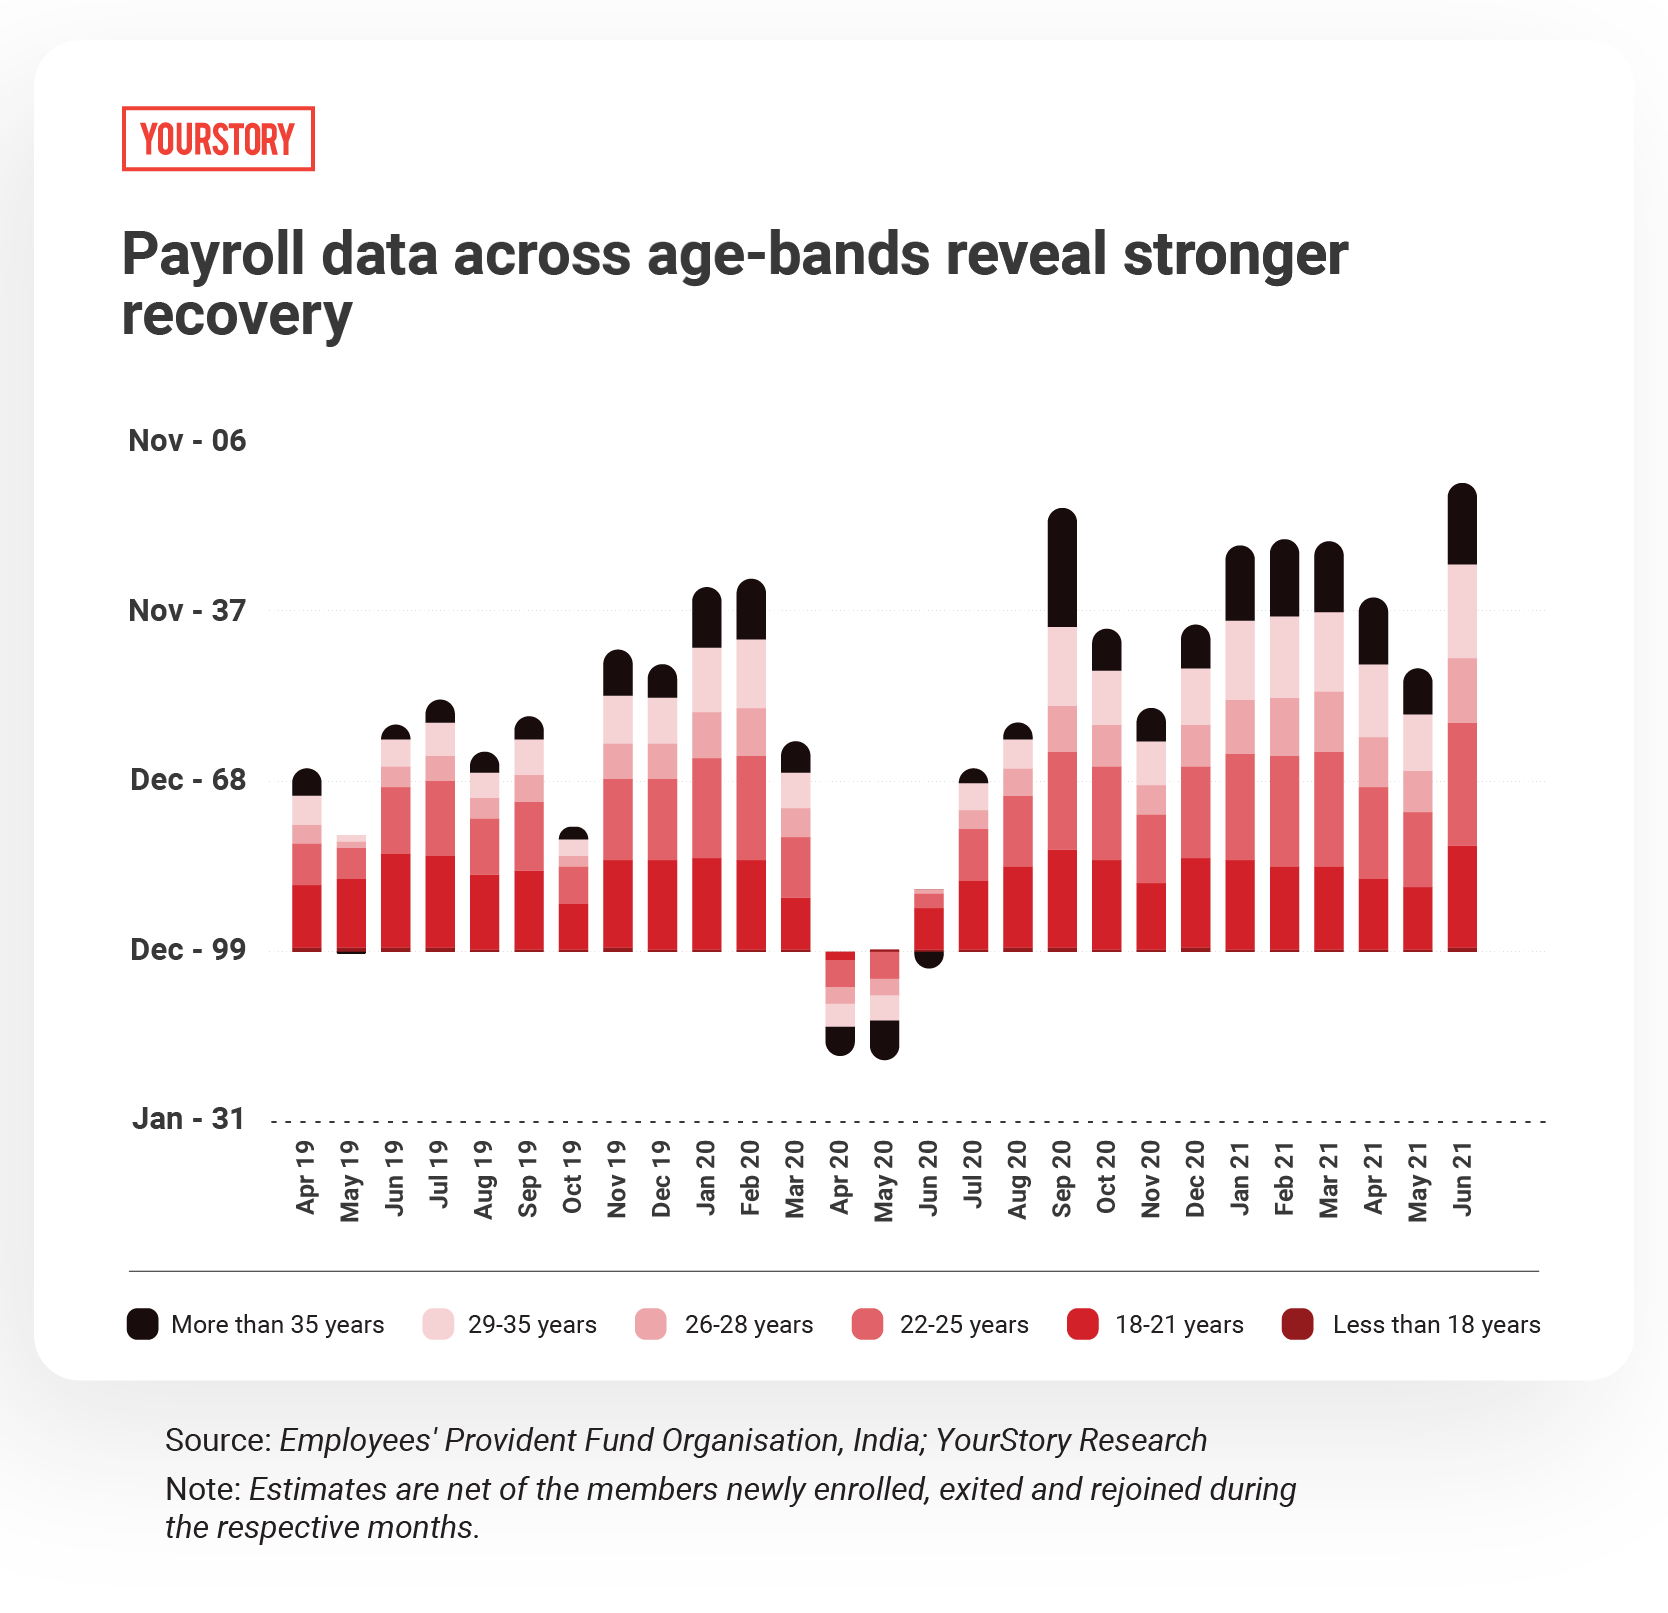 Payroll data across age-bands reveal stronger recovery